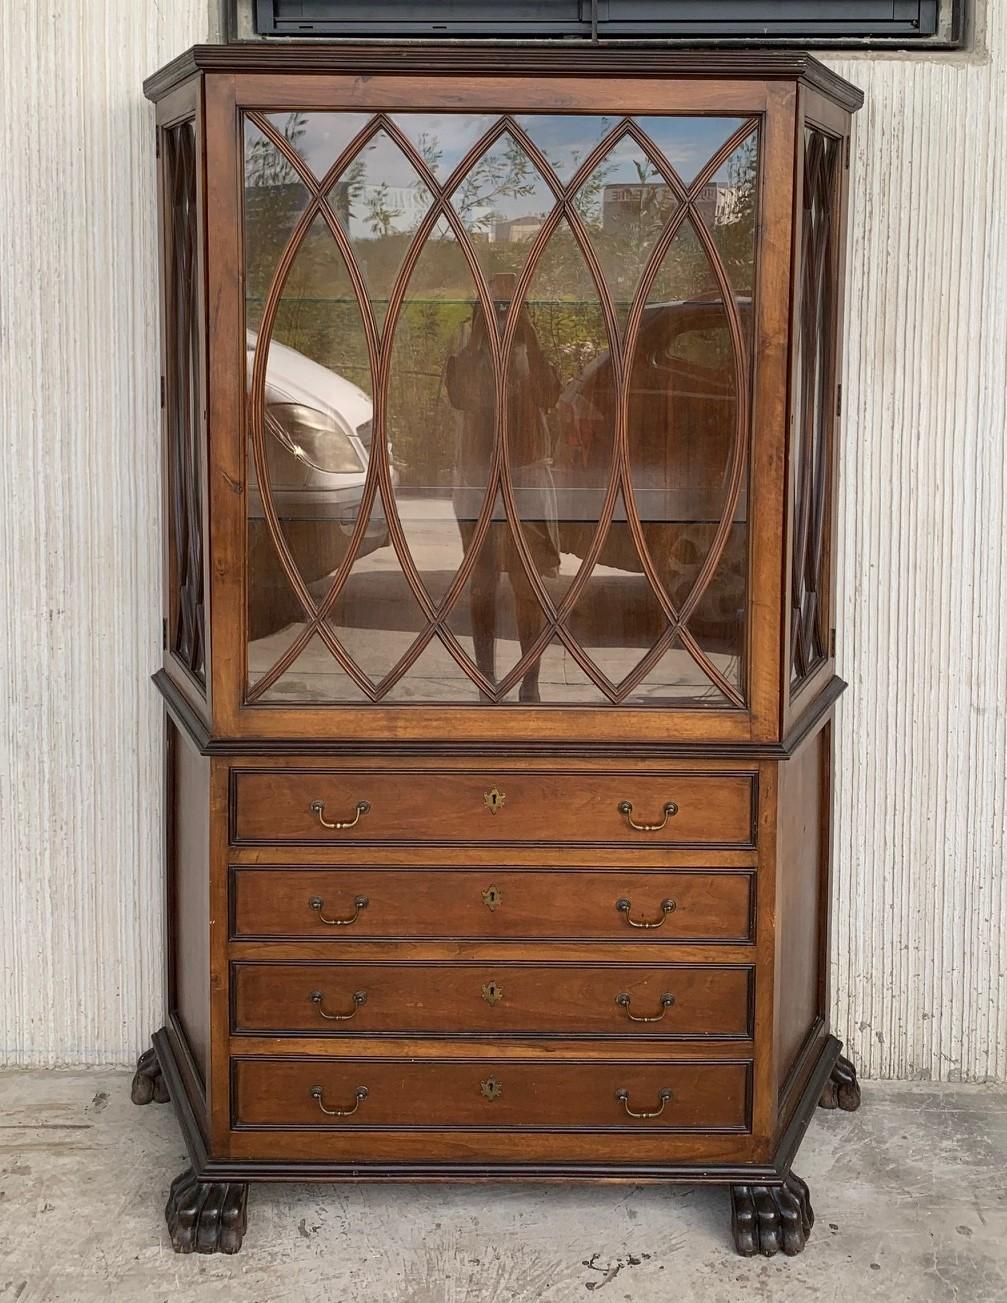 French fruitwood wooden showcase vitrine with four-drawer

Measures: Height to the drawers 33.46in.